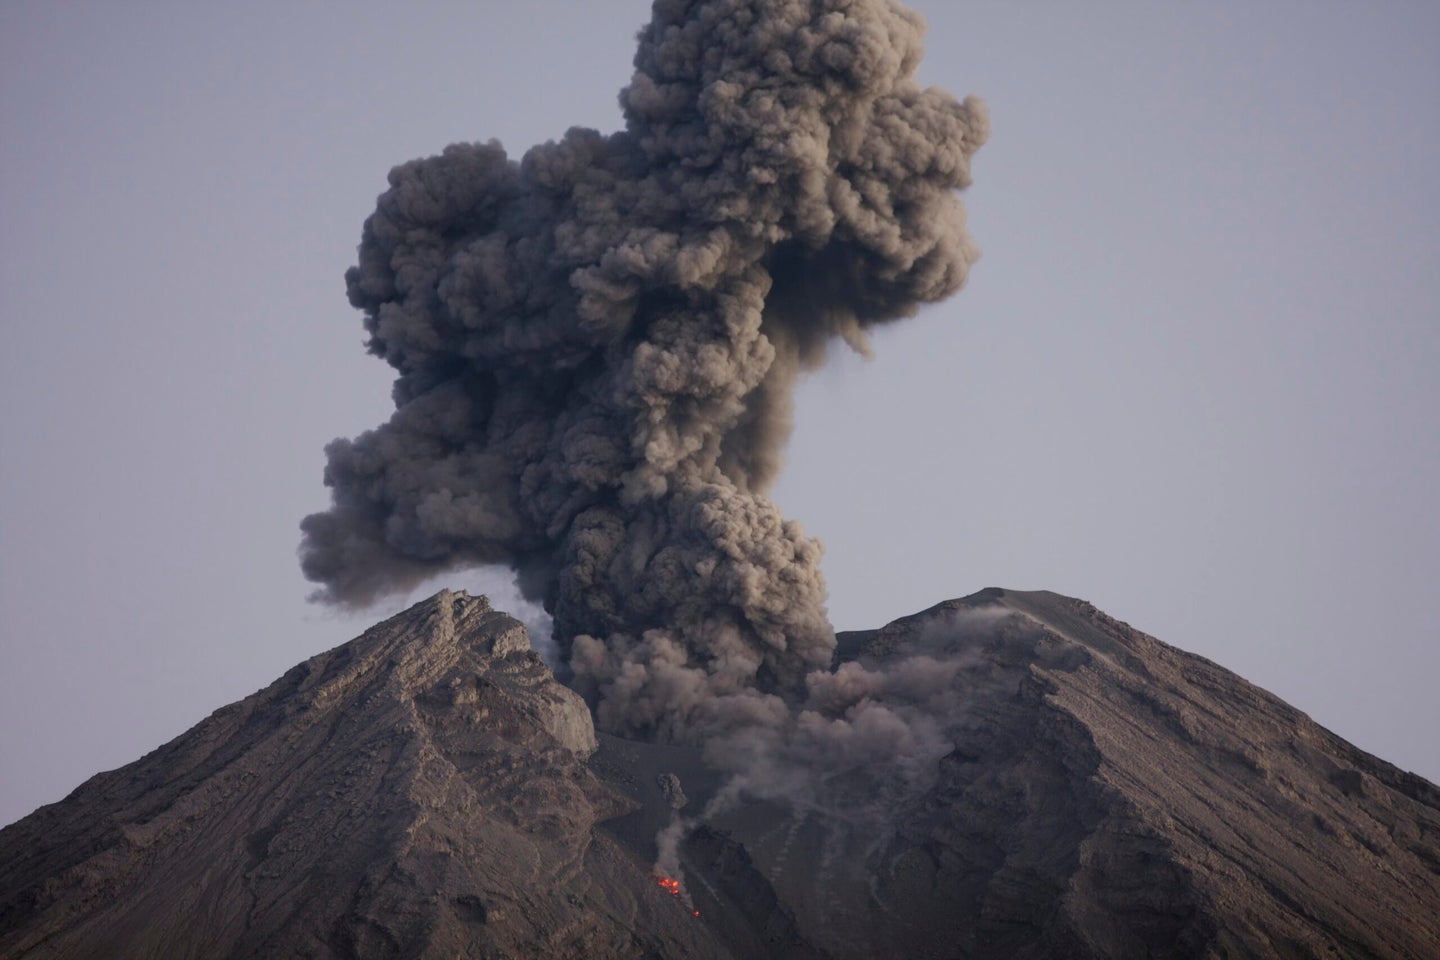 A cloud of deadly volcanic ash spews from a volcano.